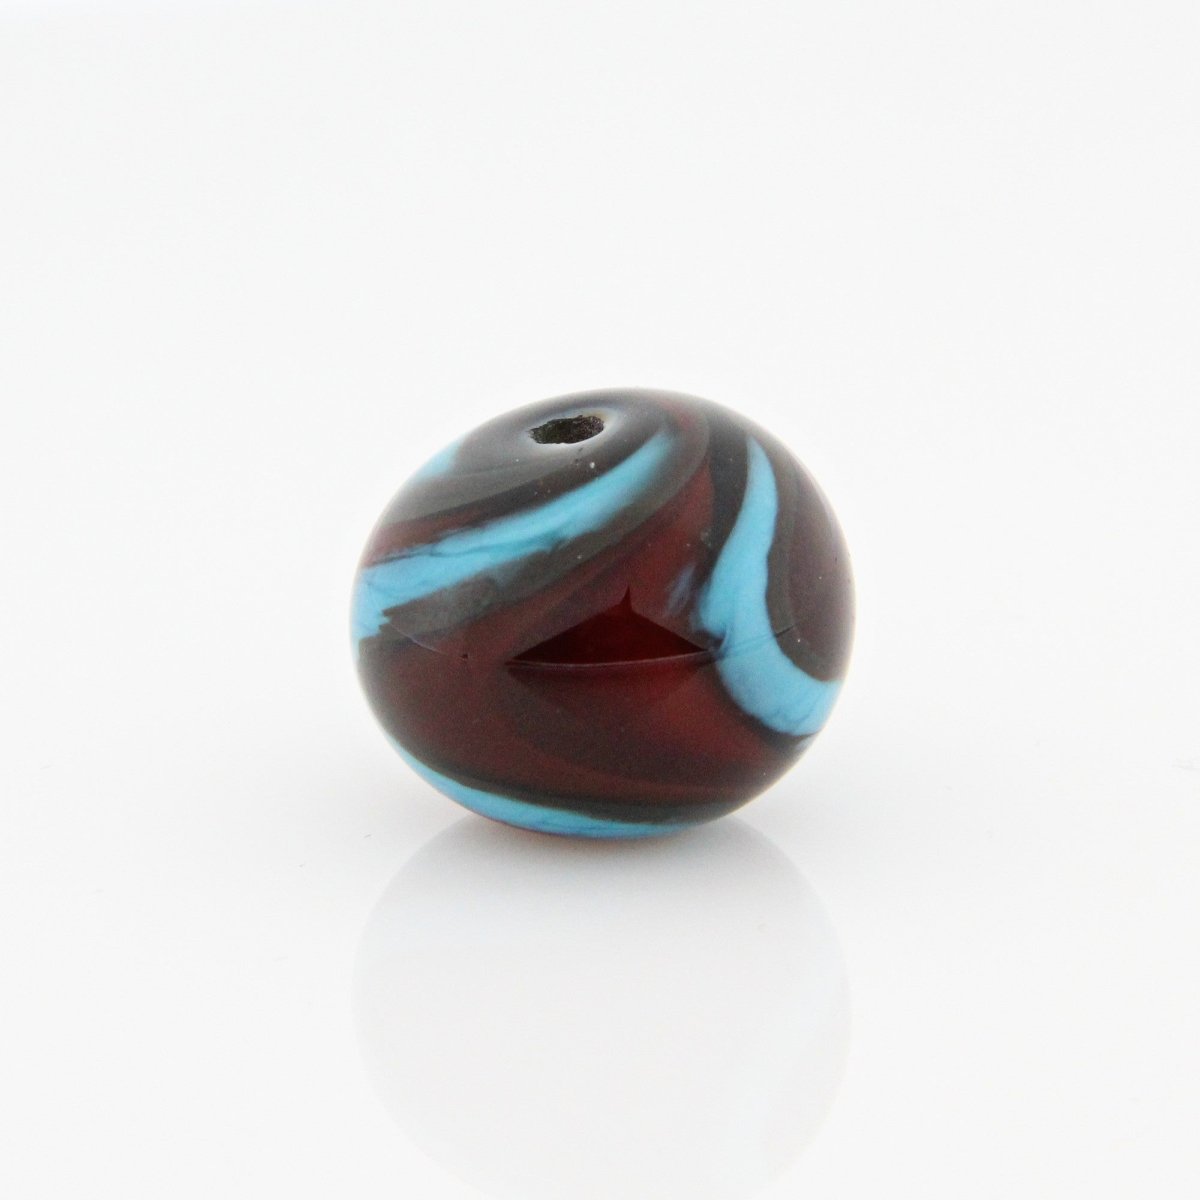 Turquoise and Red Striped Statement Bead - Handmade Glass Lampwork, Unique Focal Bead for Pendant, Suncatcher, or Home Decorating